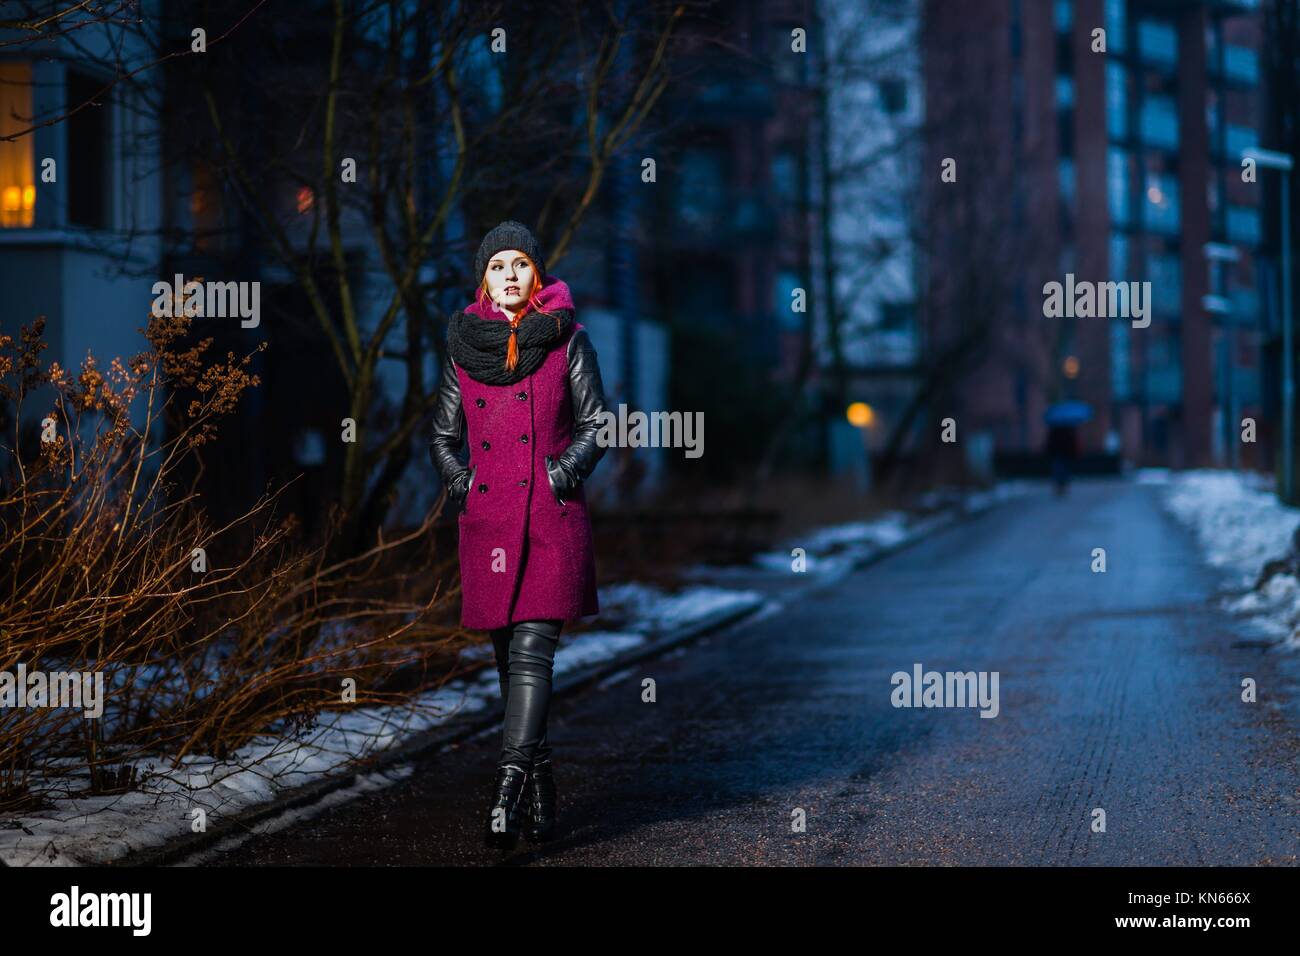 Attractive woman wearing winter coat, city evening on background. Stock Photo